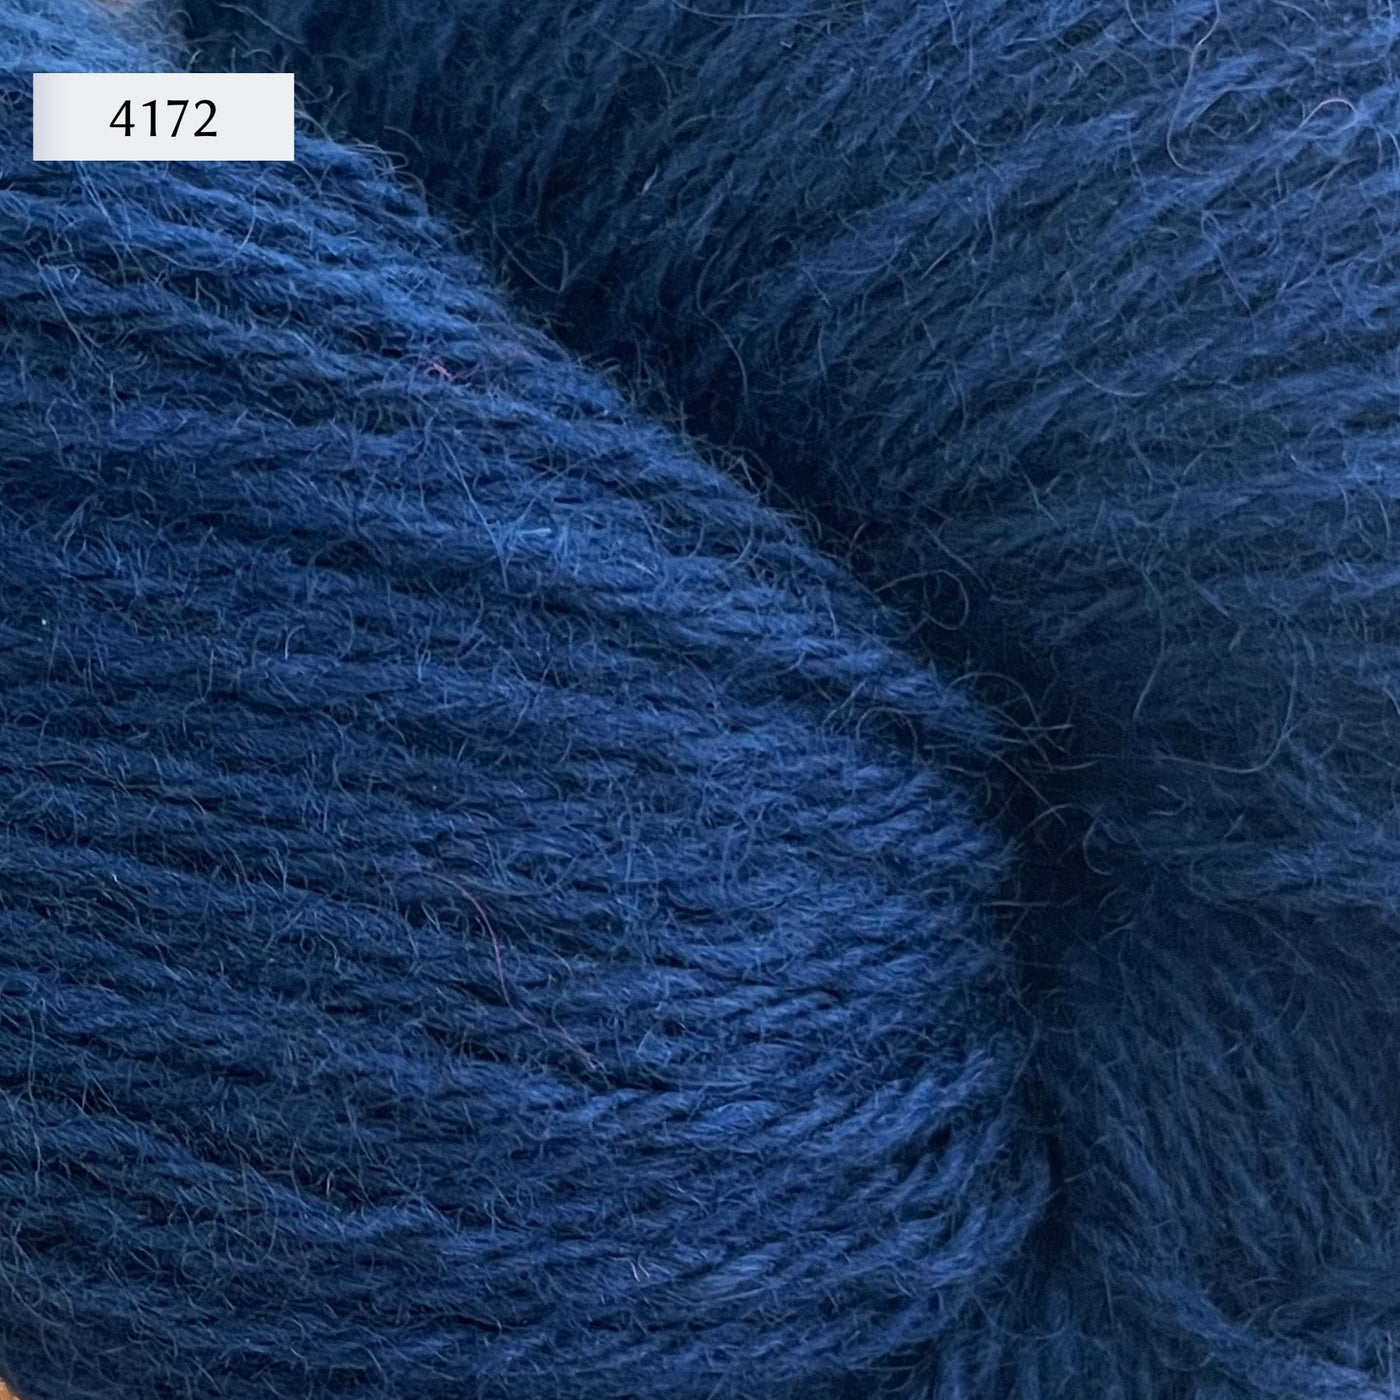 Ullcentrum 3ply, a worsted weight wool yarn, in color 4172, a rich cobalt blue